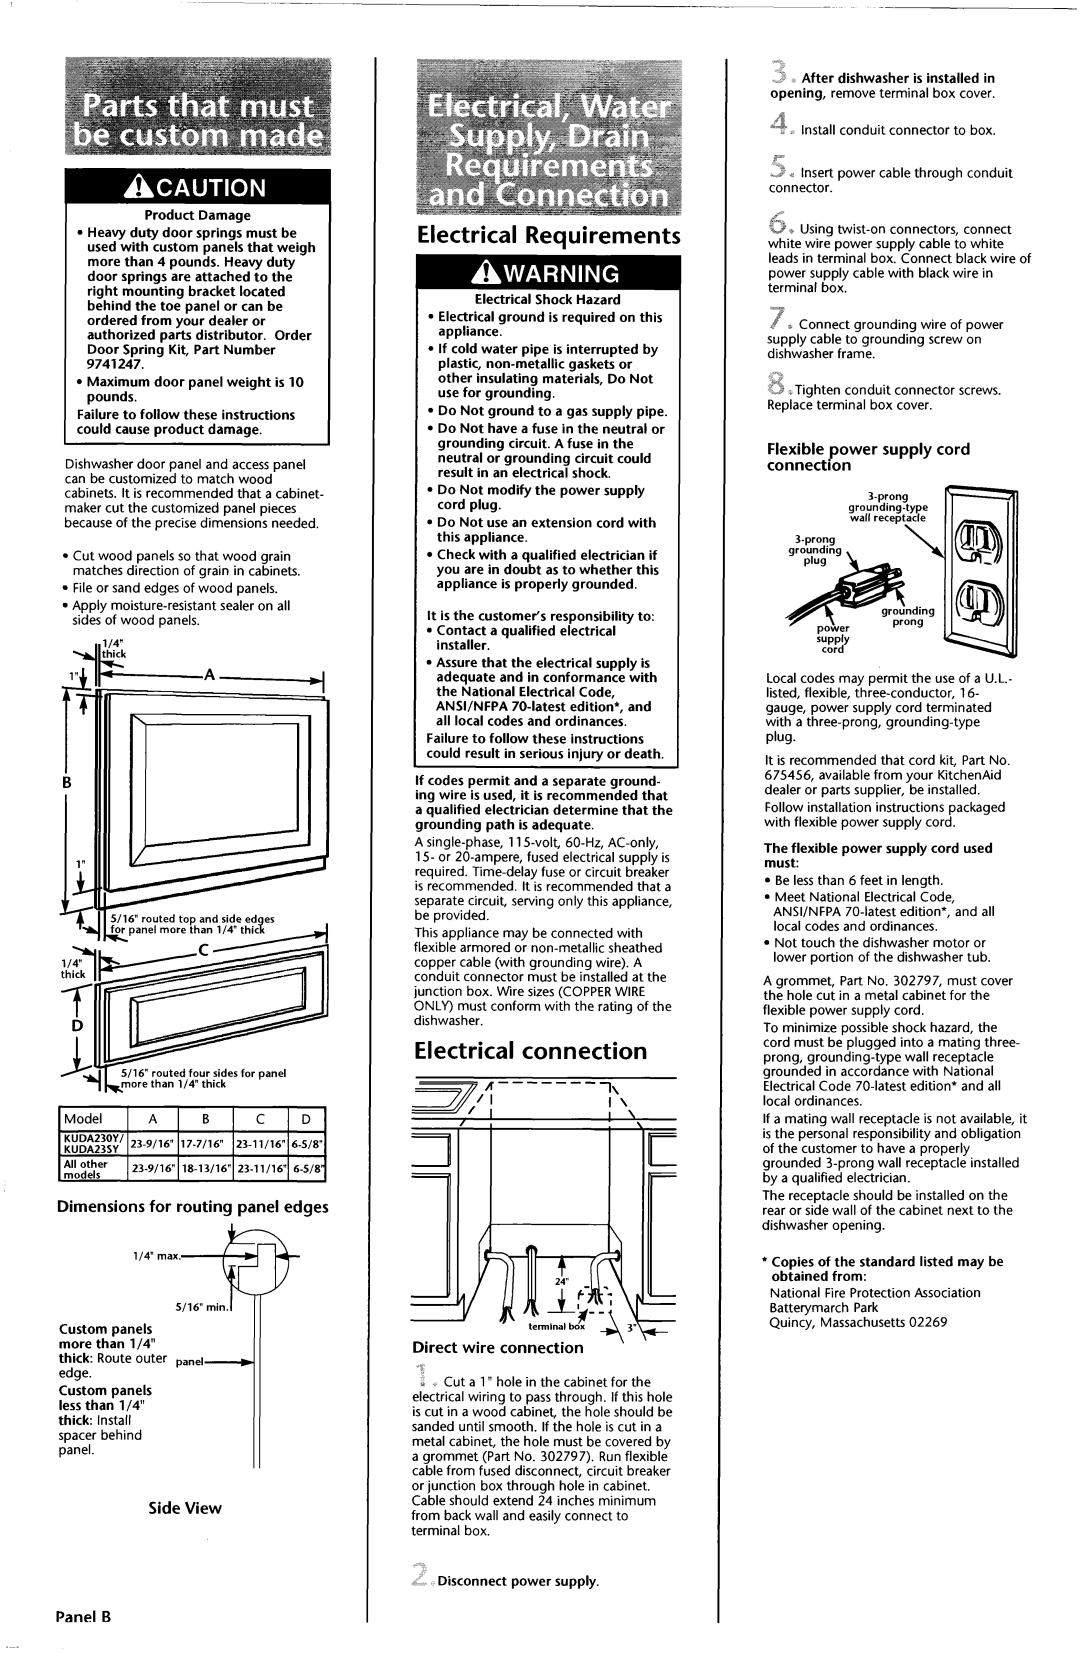 KitchenAid 9741183 Electrical Requirements, Dimensions for routing panel edges, I ‘, Direct wire connection, Panel B 